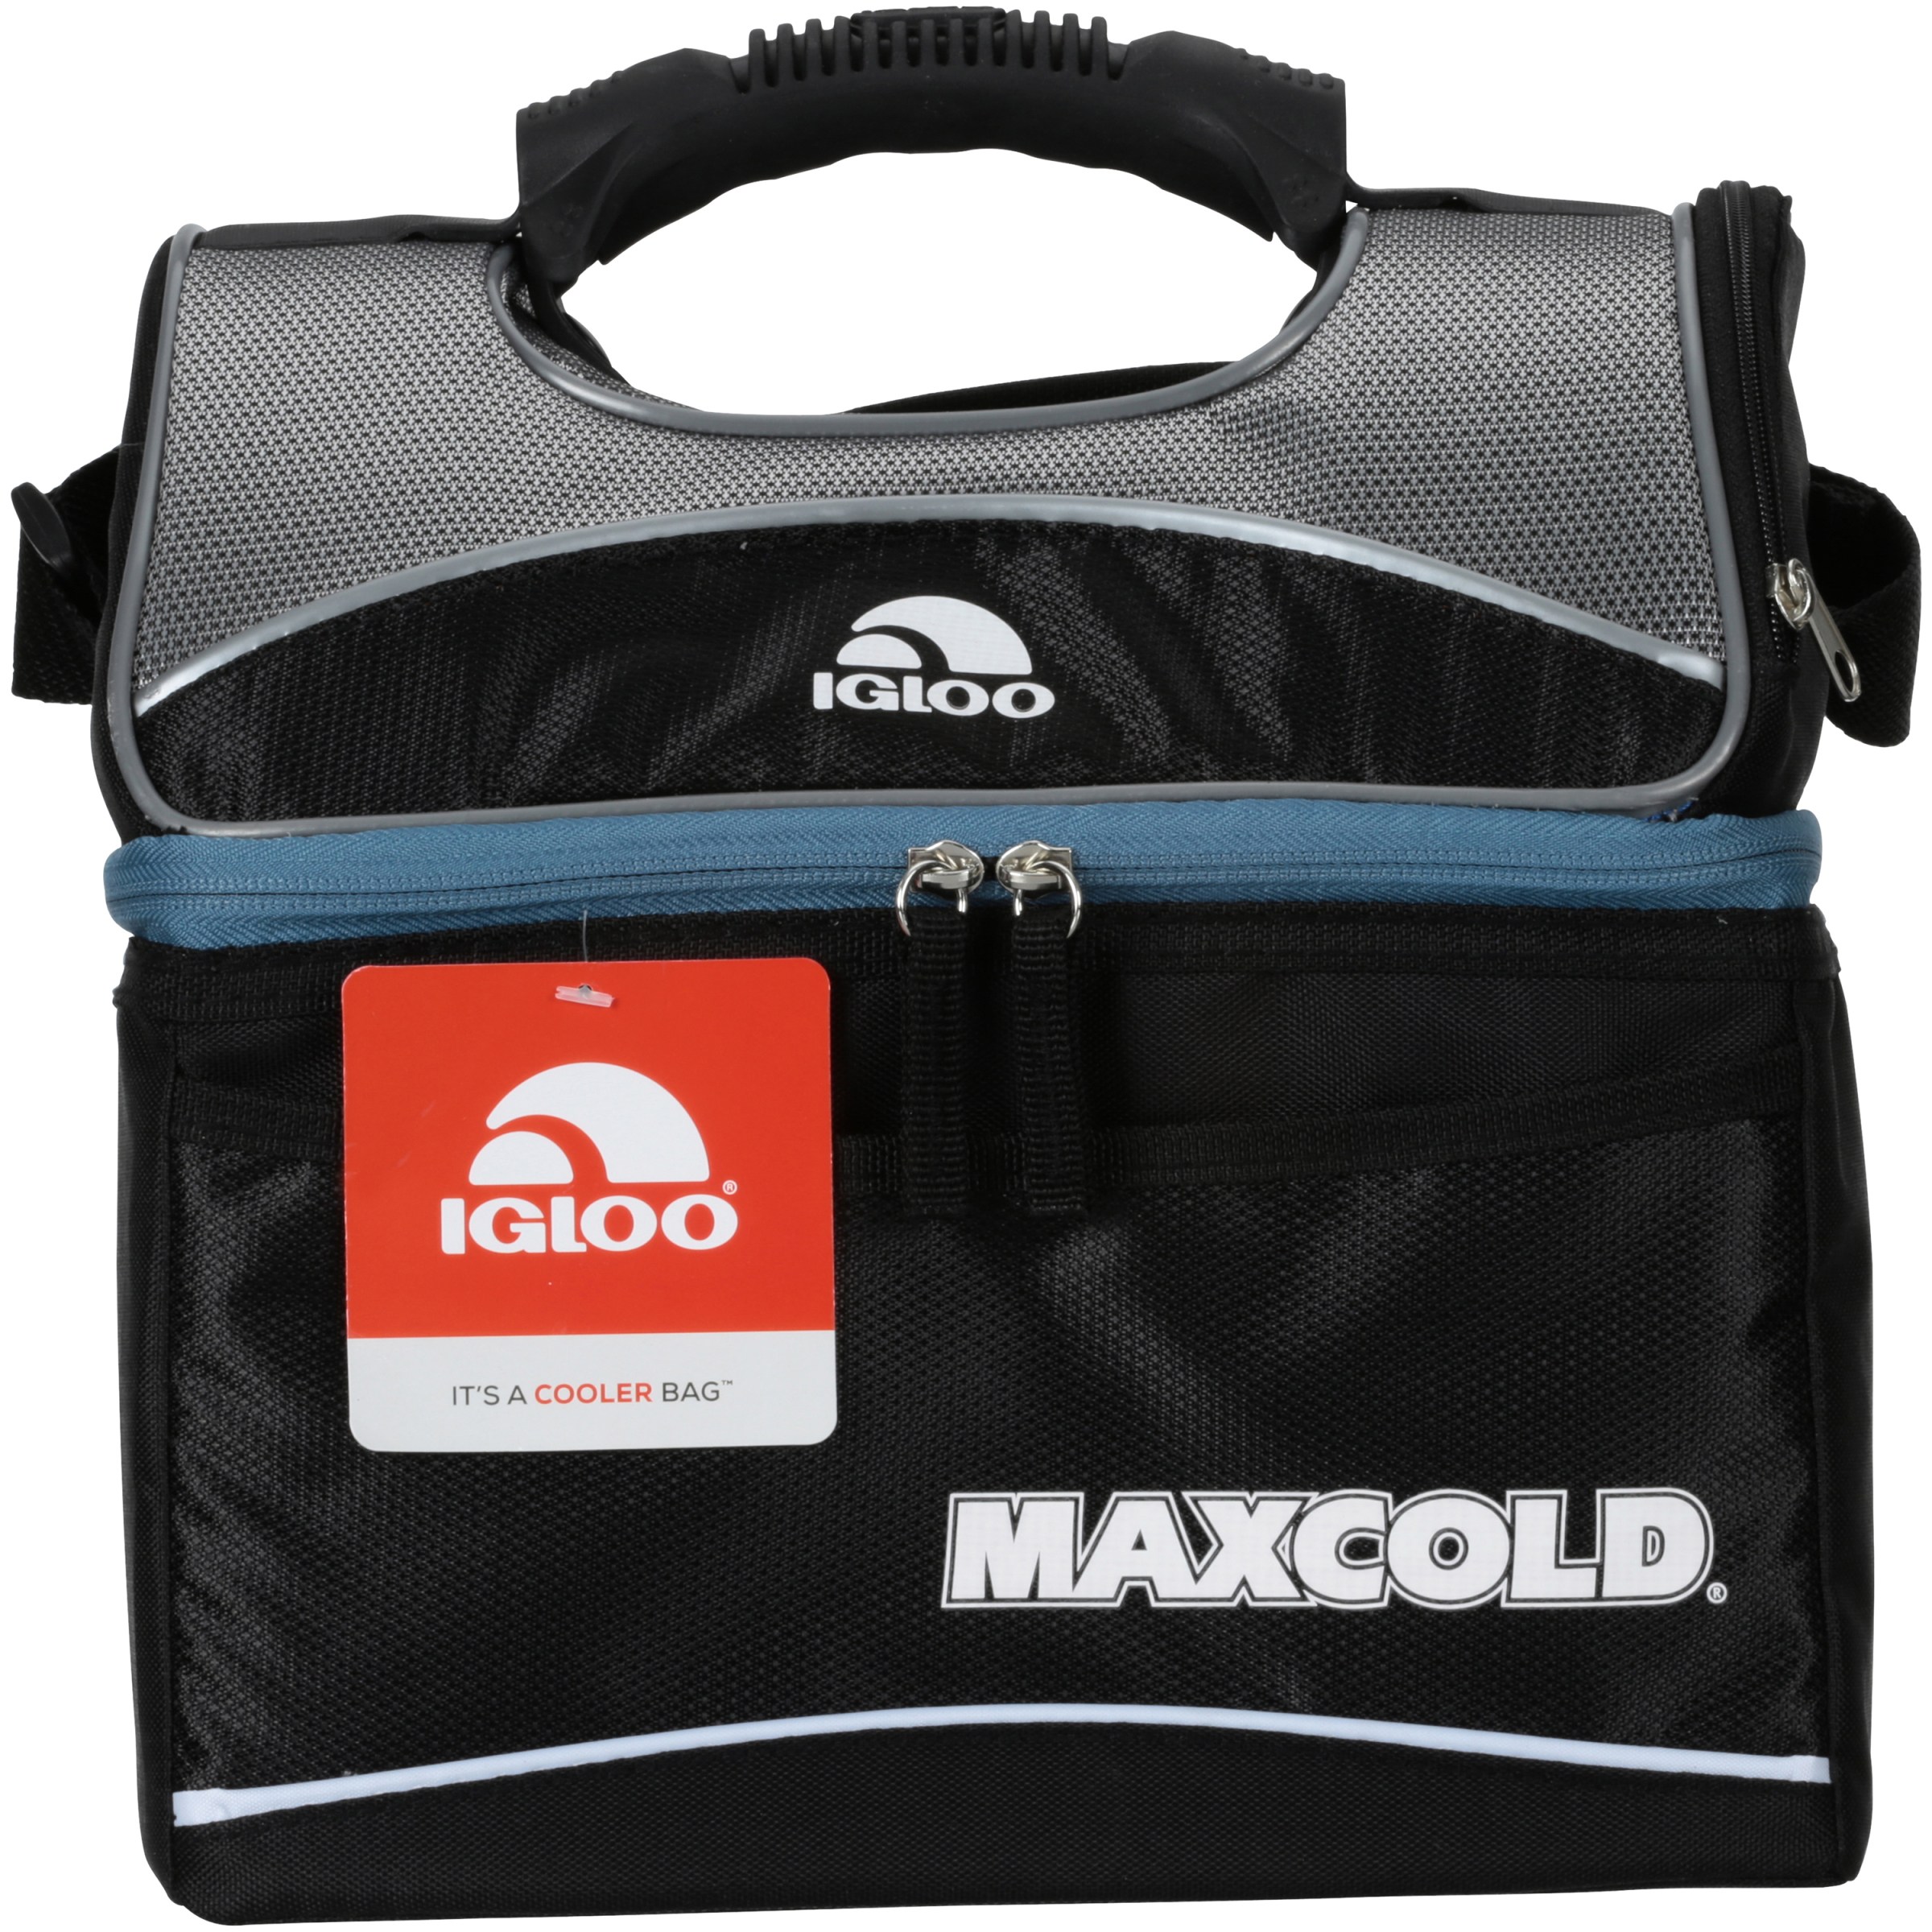 Igloo MaxCold Gripper 16-Qt Lunch Box, Black - image 2 of 4